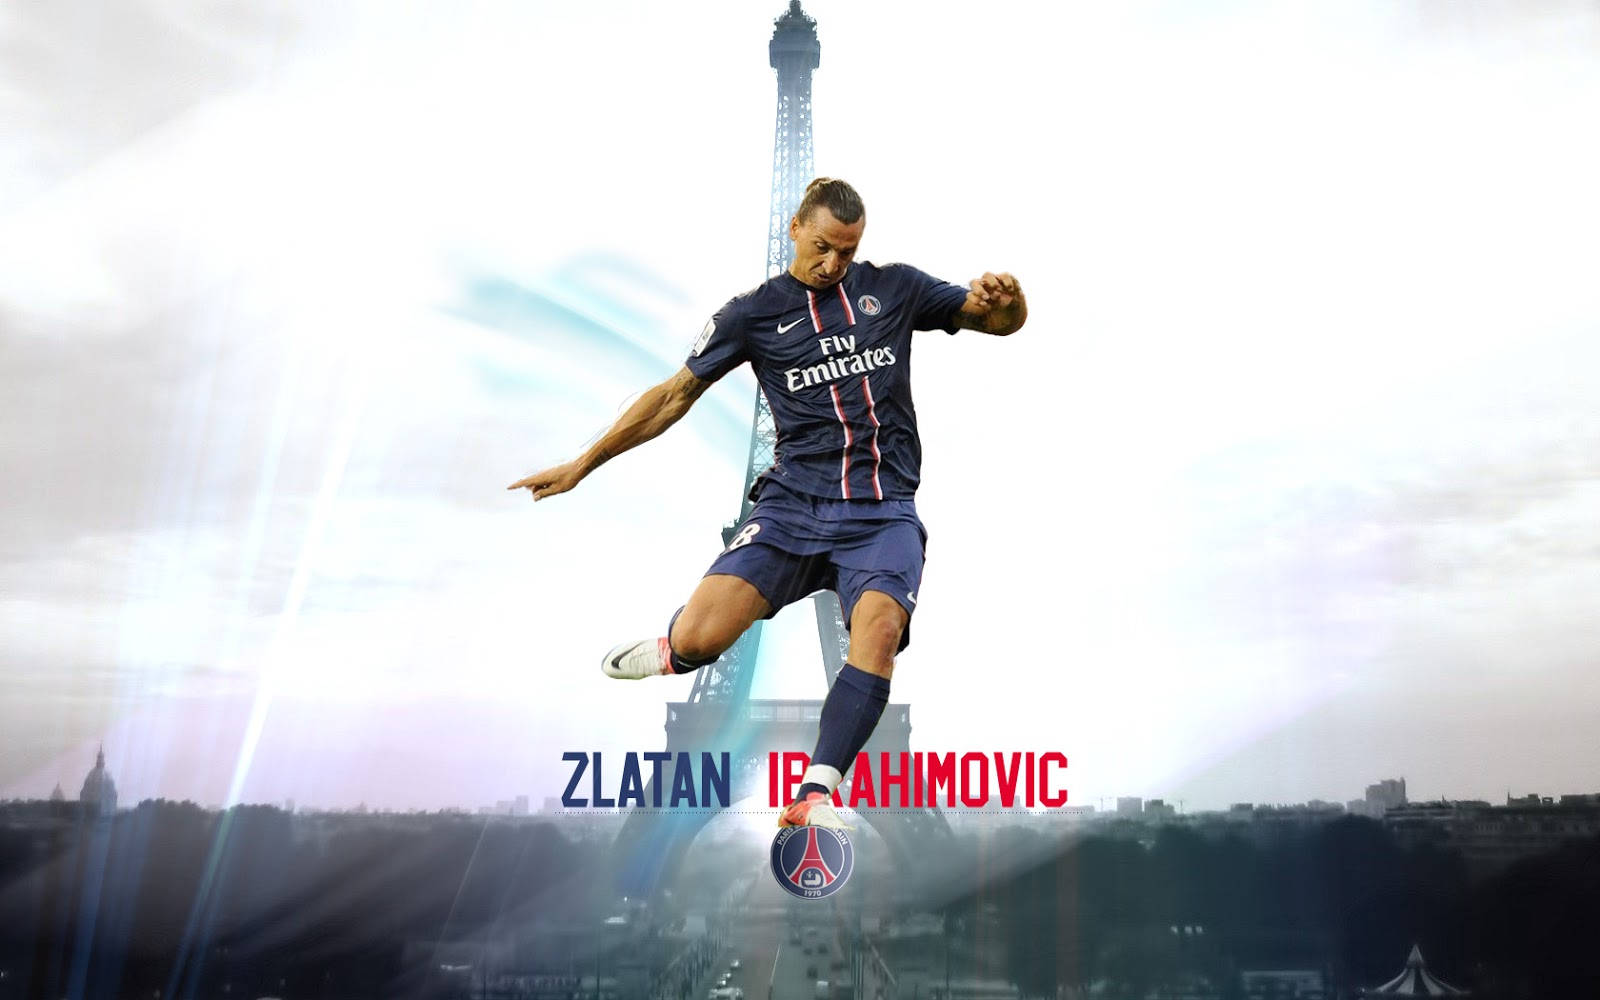 Zlatan Ibrahimovic new original Wallpaper Its All About Wallpapers